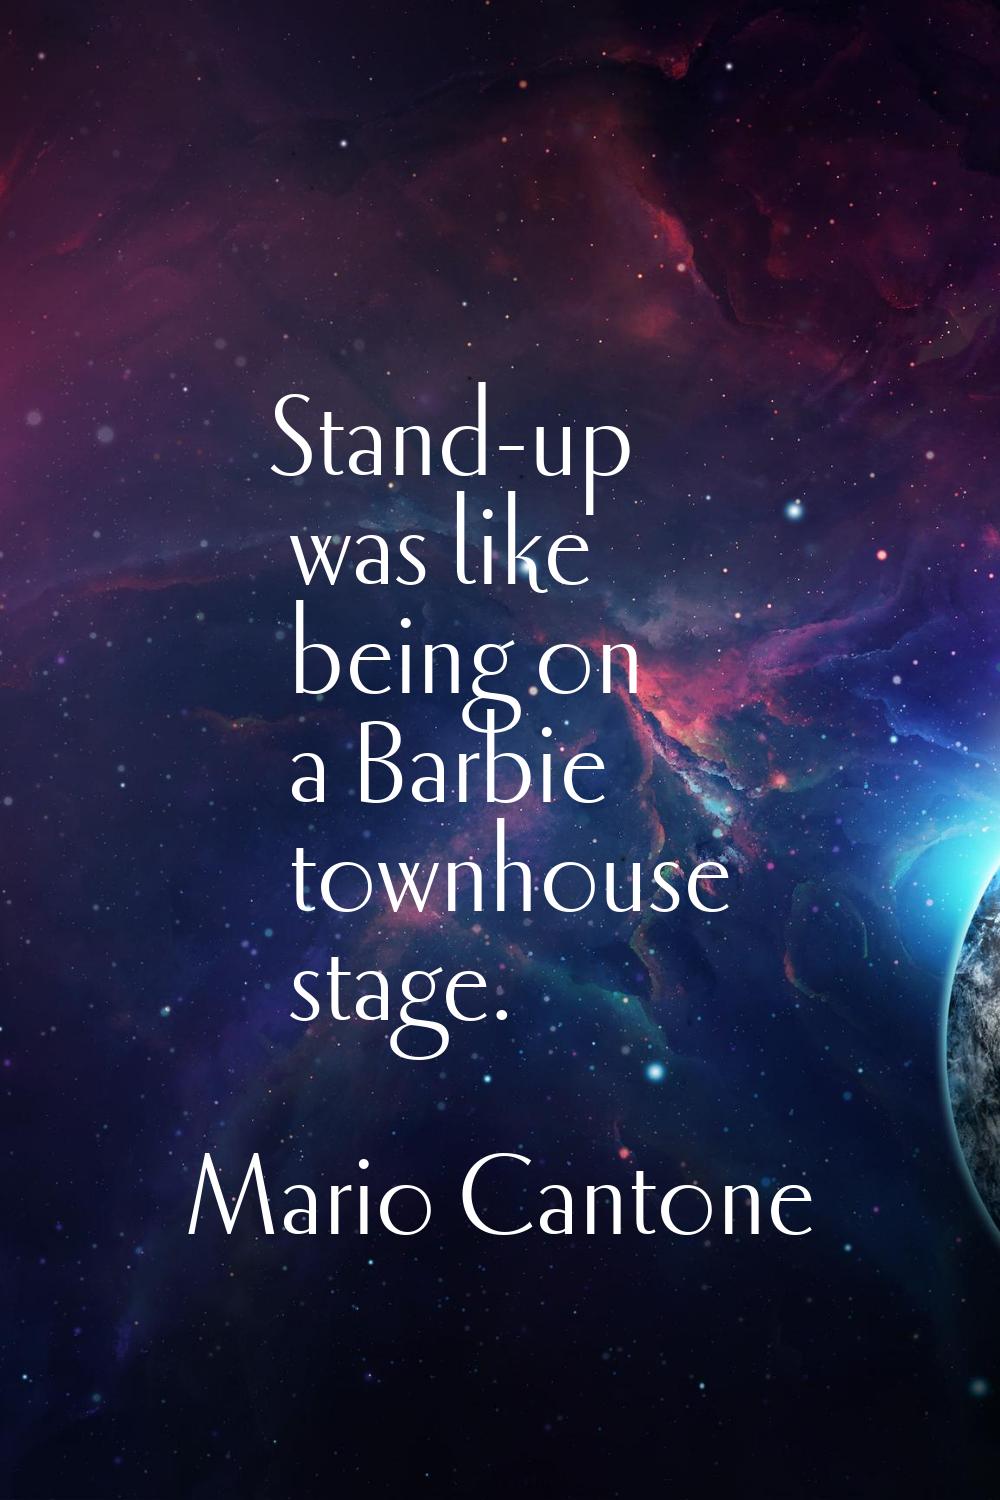 Stand-up was like being on a Barbie townhouse stage.